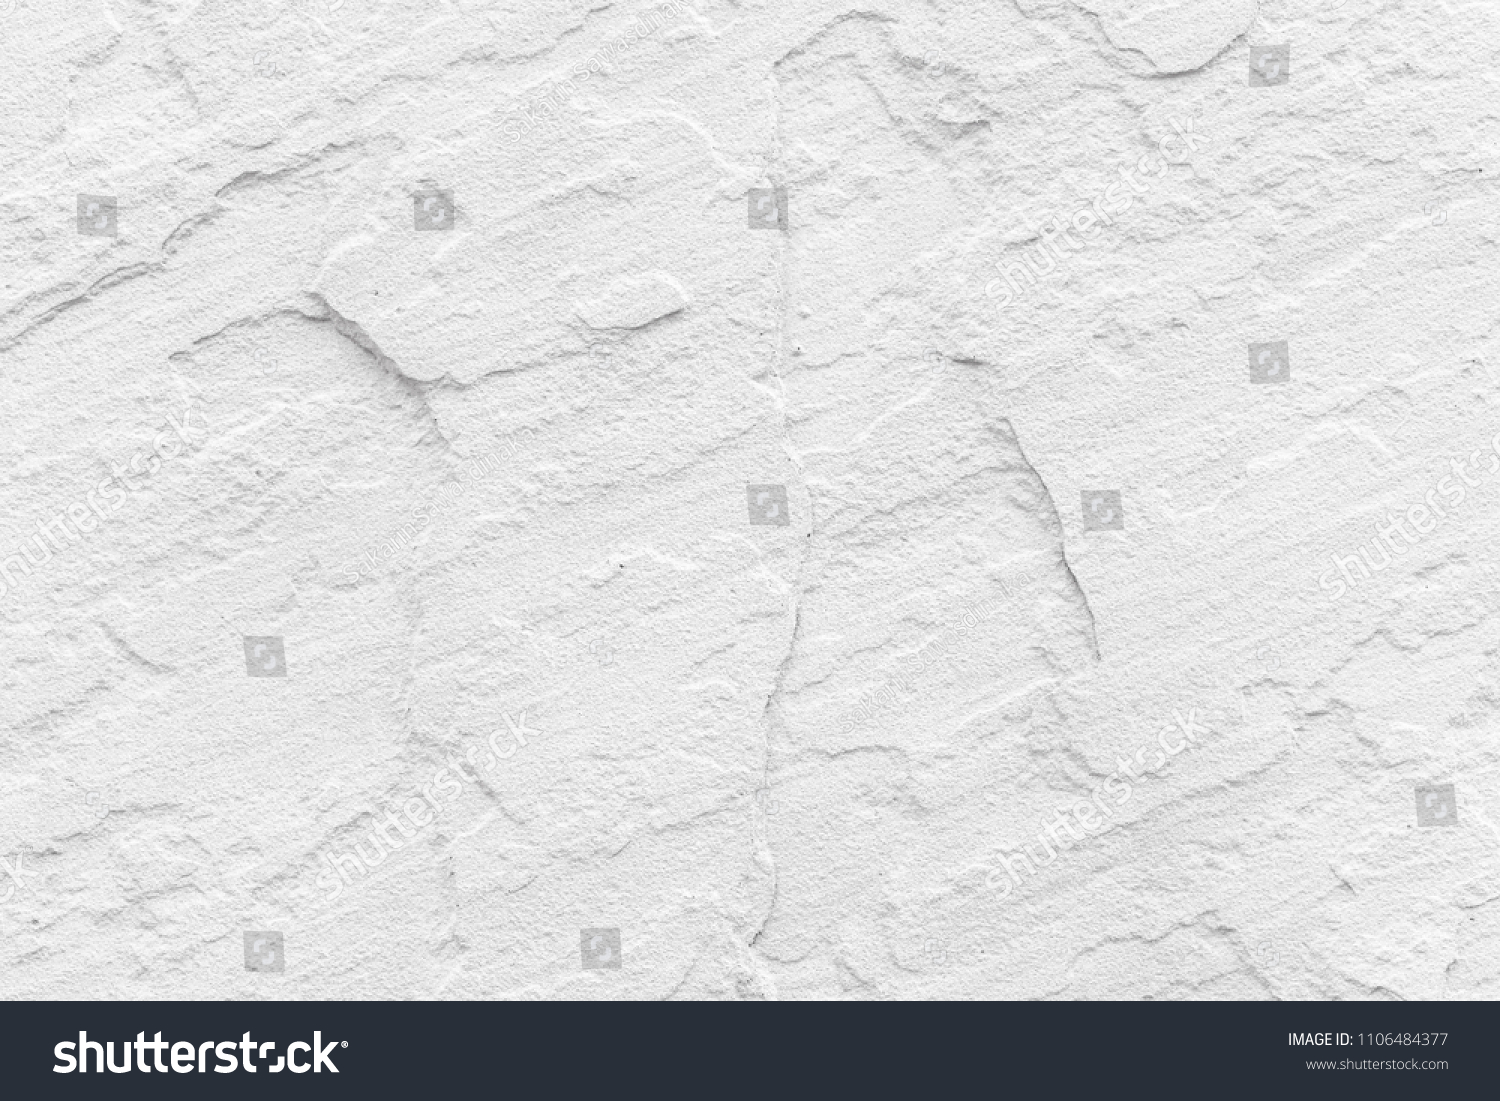 Abstract marble texture background for design. #1106484377